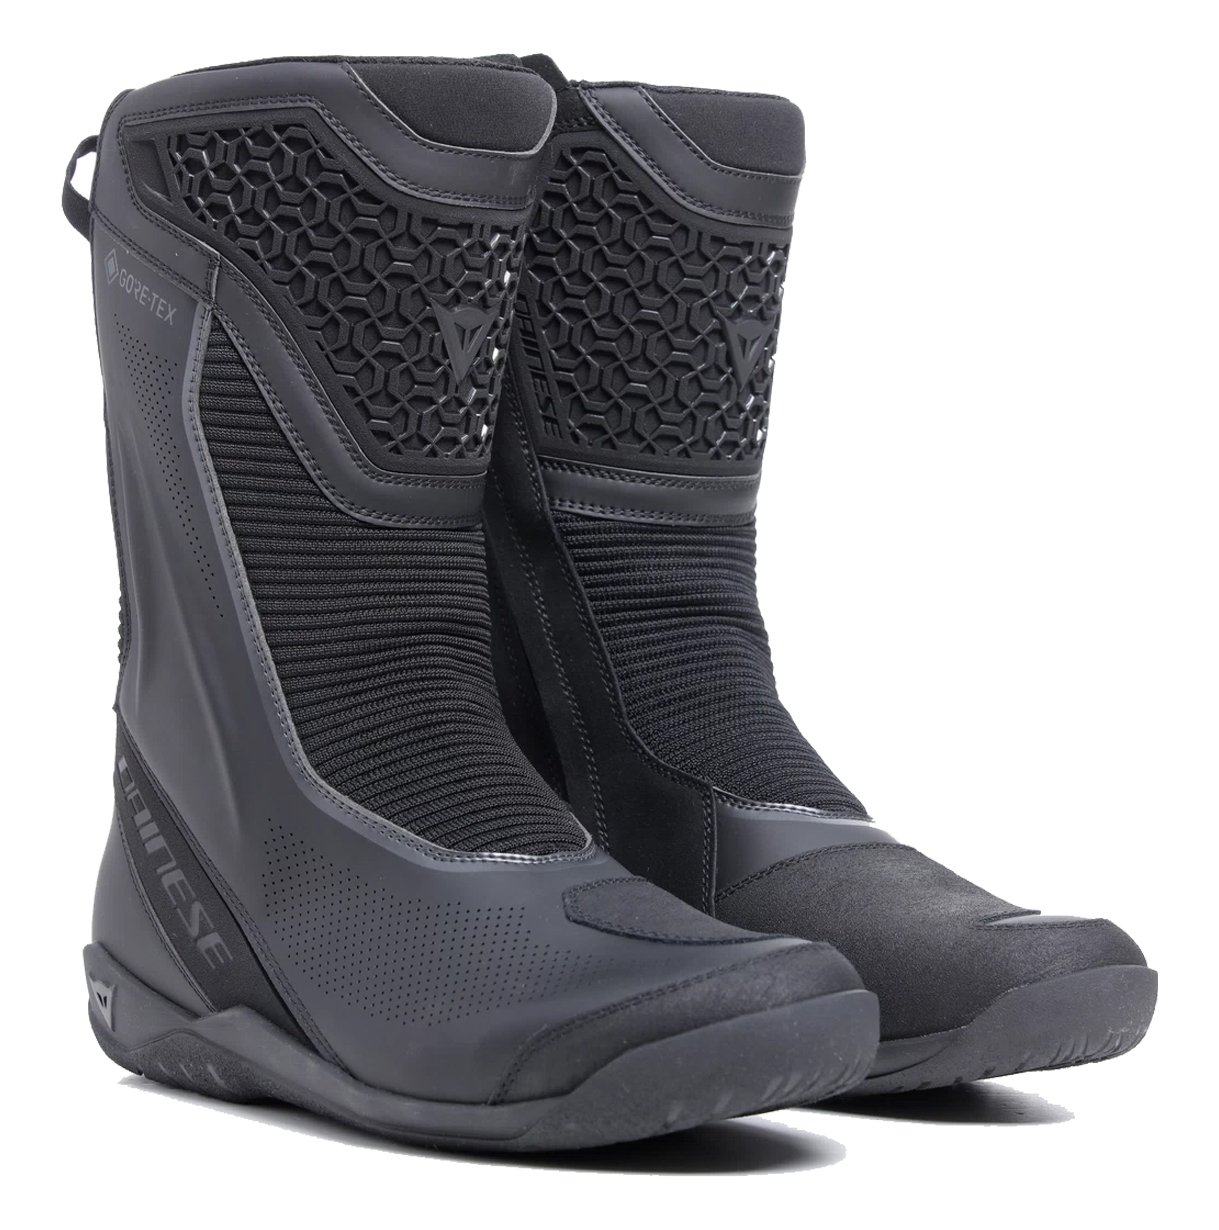 Image of Dainese Freeland 2 Gore-Tex Boots Black Size 41 ID 8051019692603